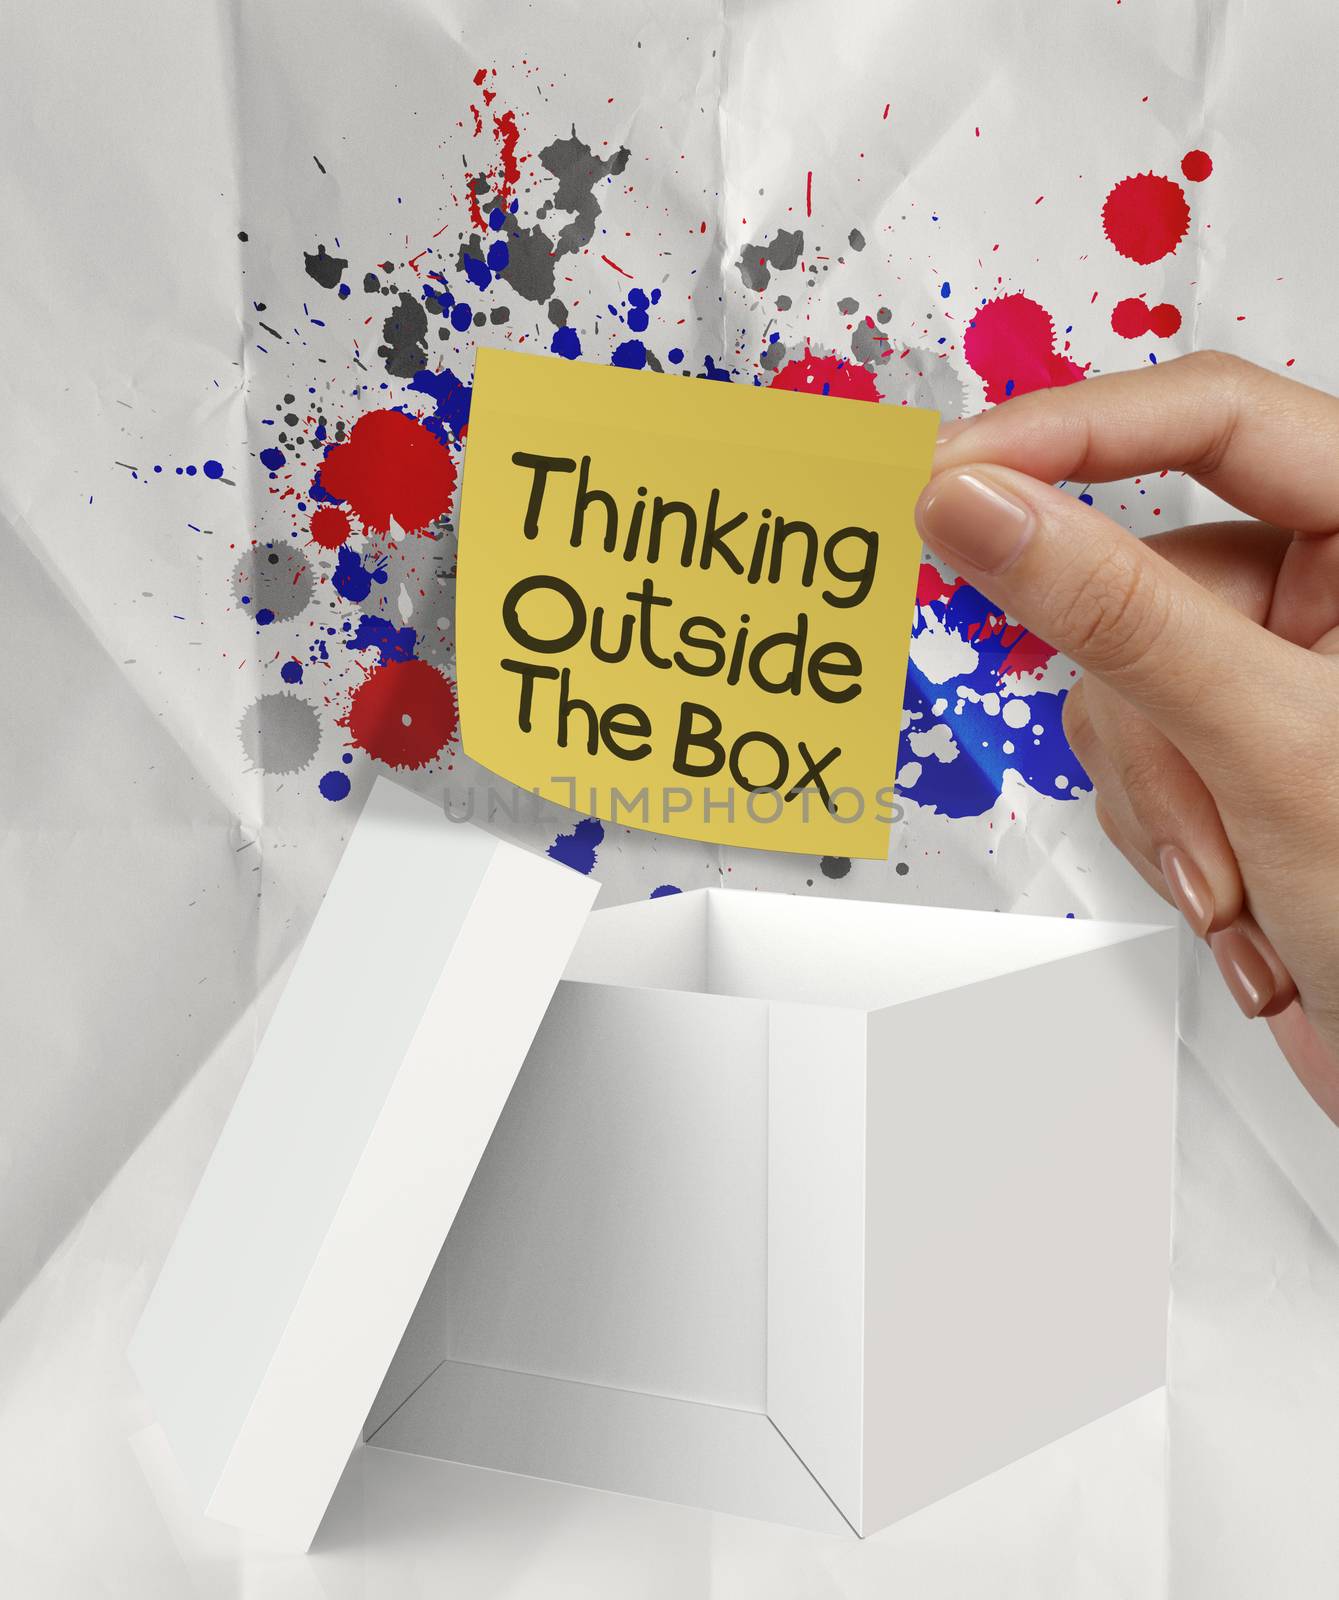 thinking outside the box and splash colors crumpled paper as con by everythingpossible